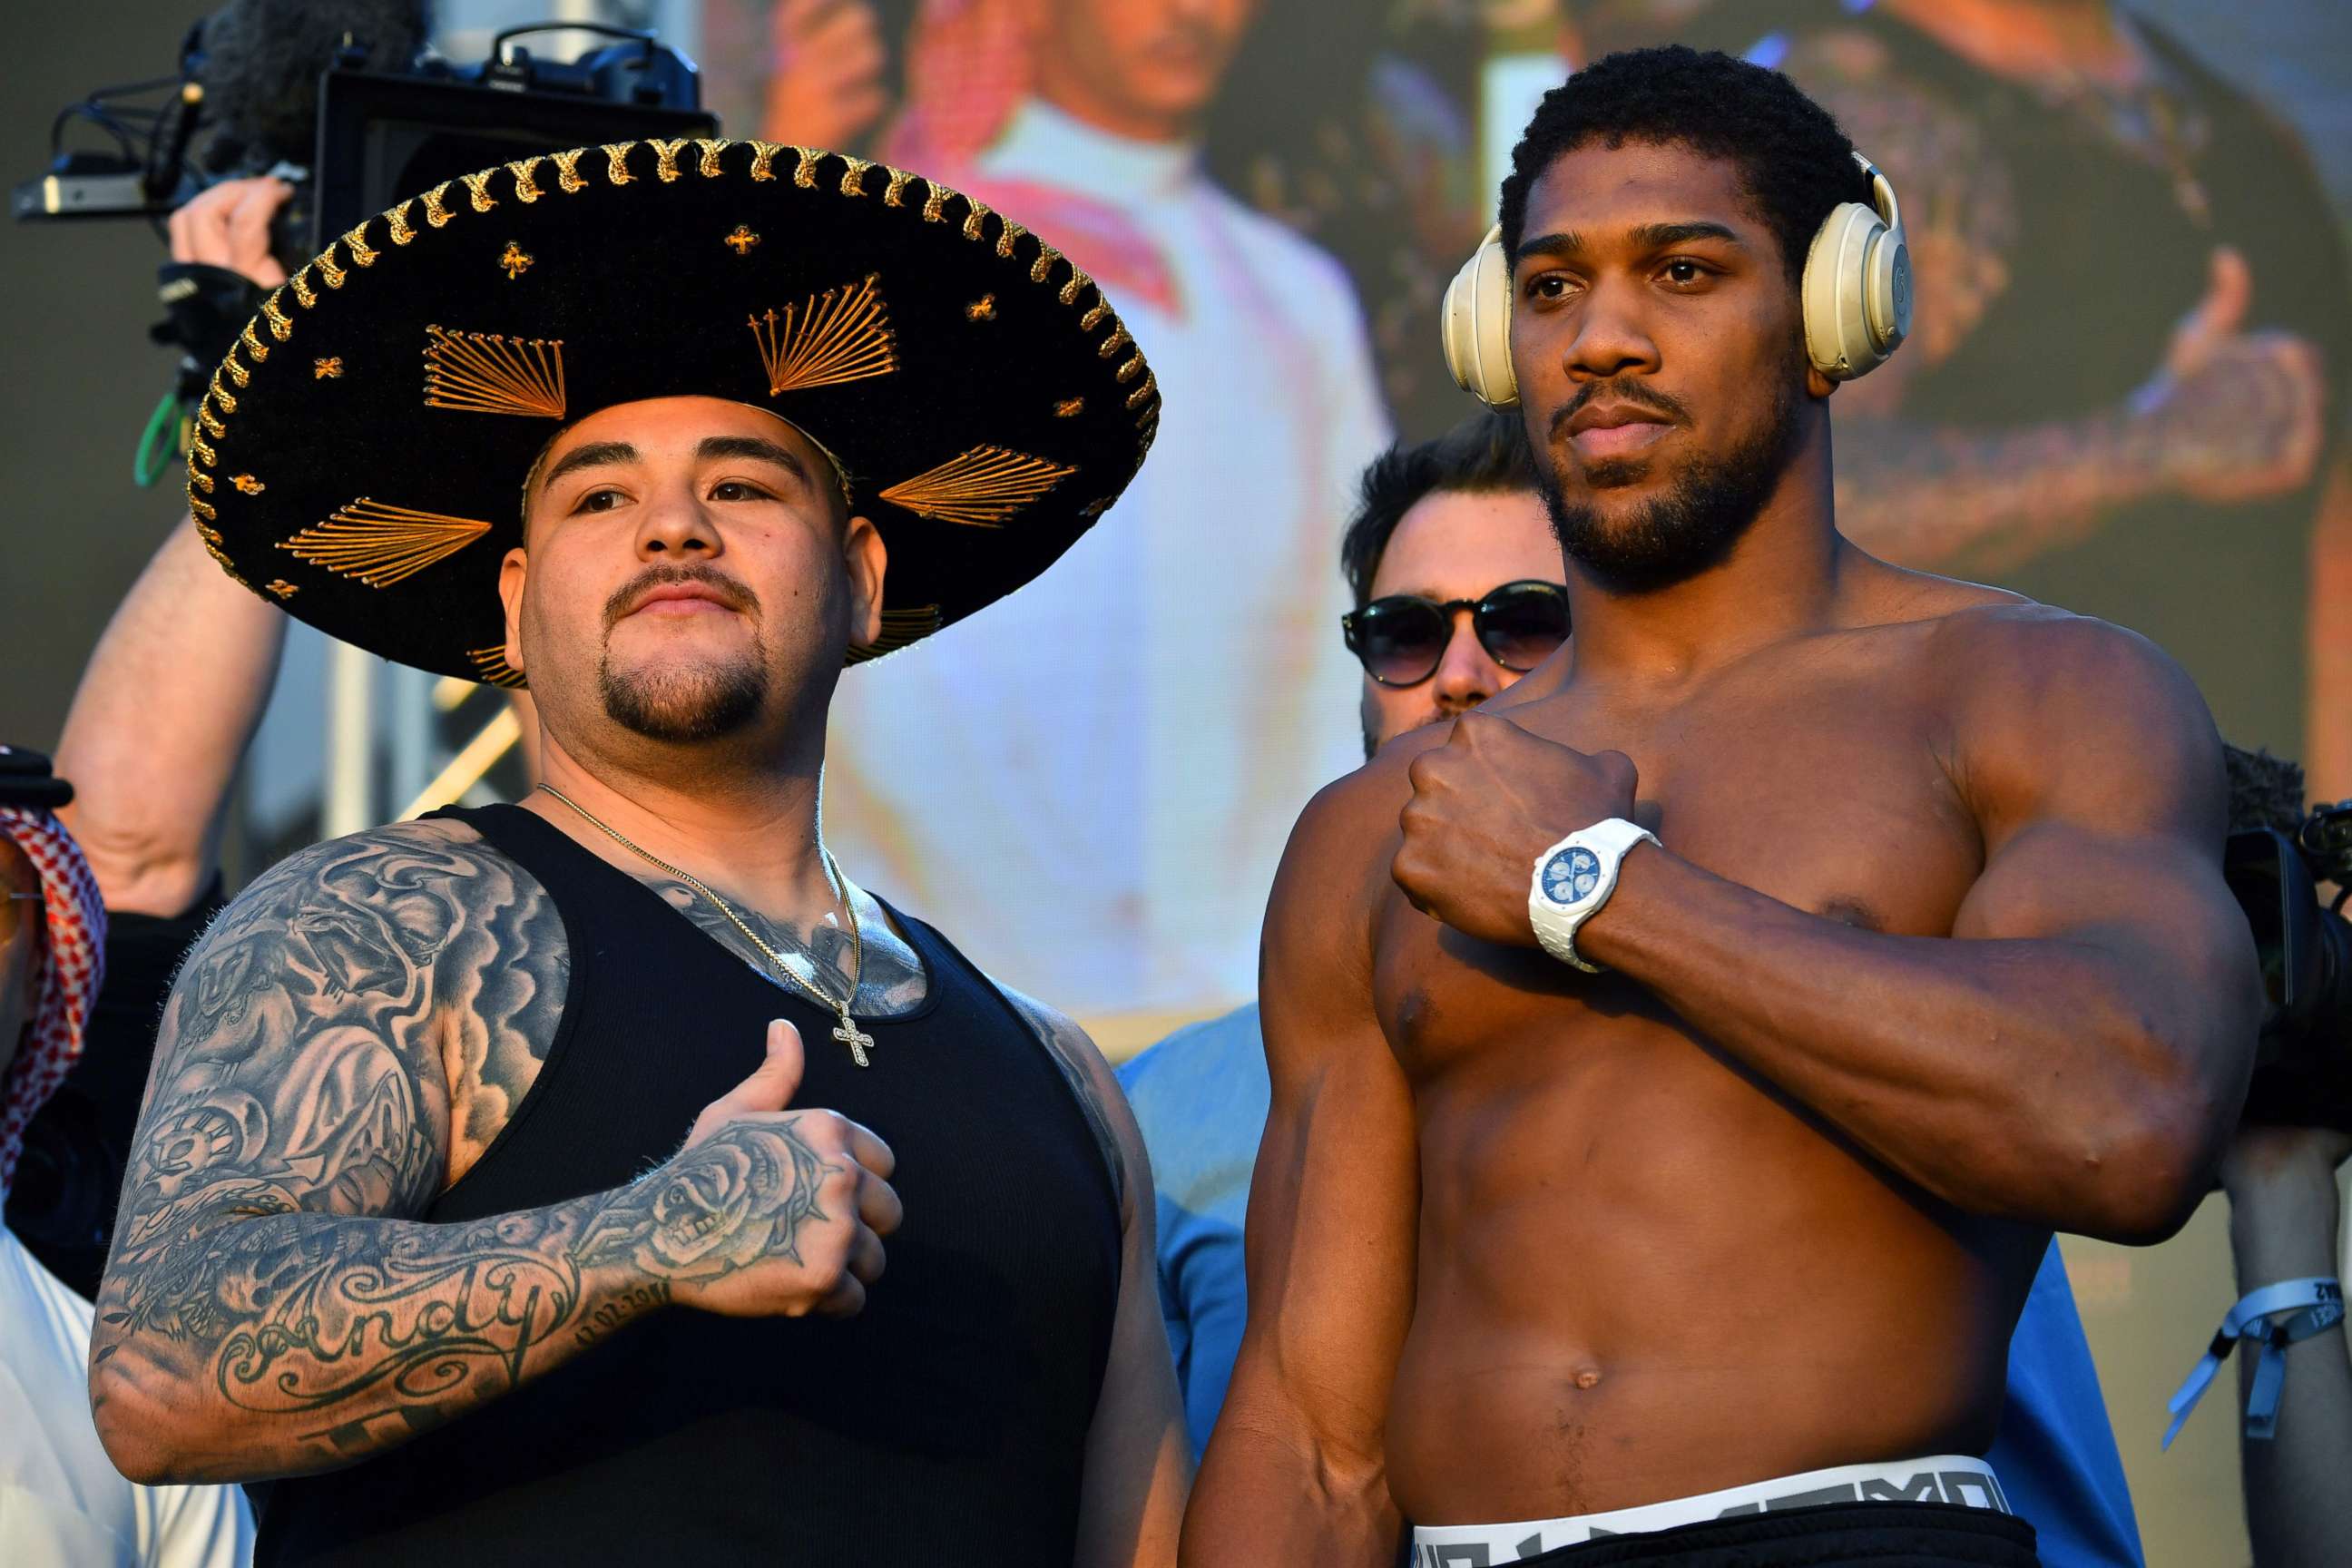 PHOTO: Mexican-American heavyweight boxing champion Andy Ruiz Jr (L) and British heavyweight boxing challenger Anthony Joshua pose during the official weigh-in at Diriyah in the Saudi capital Riyadh.